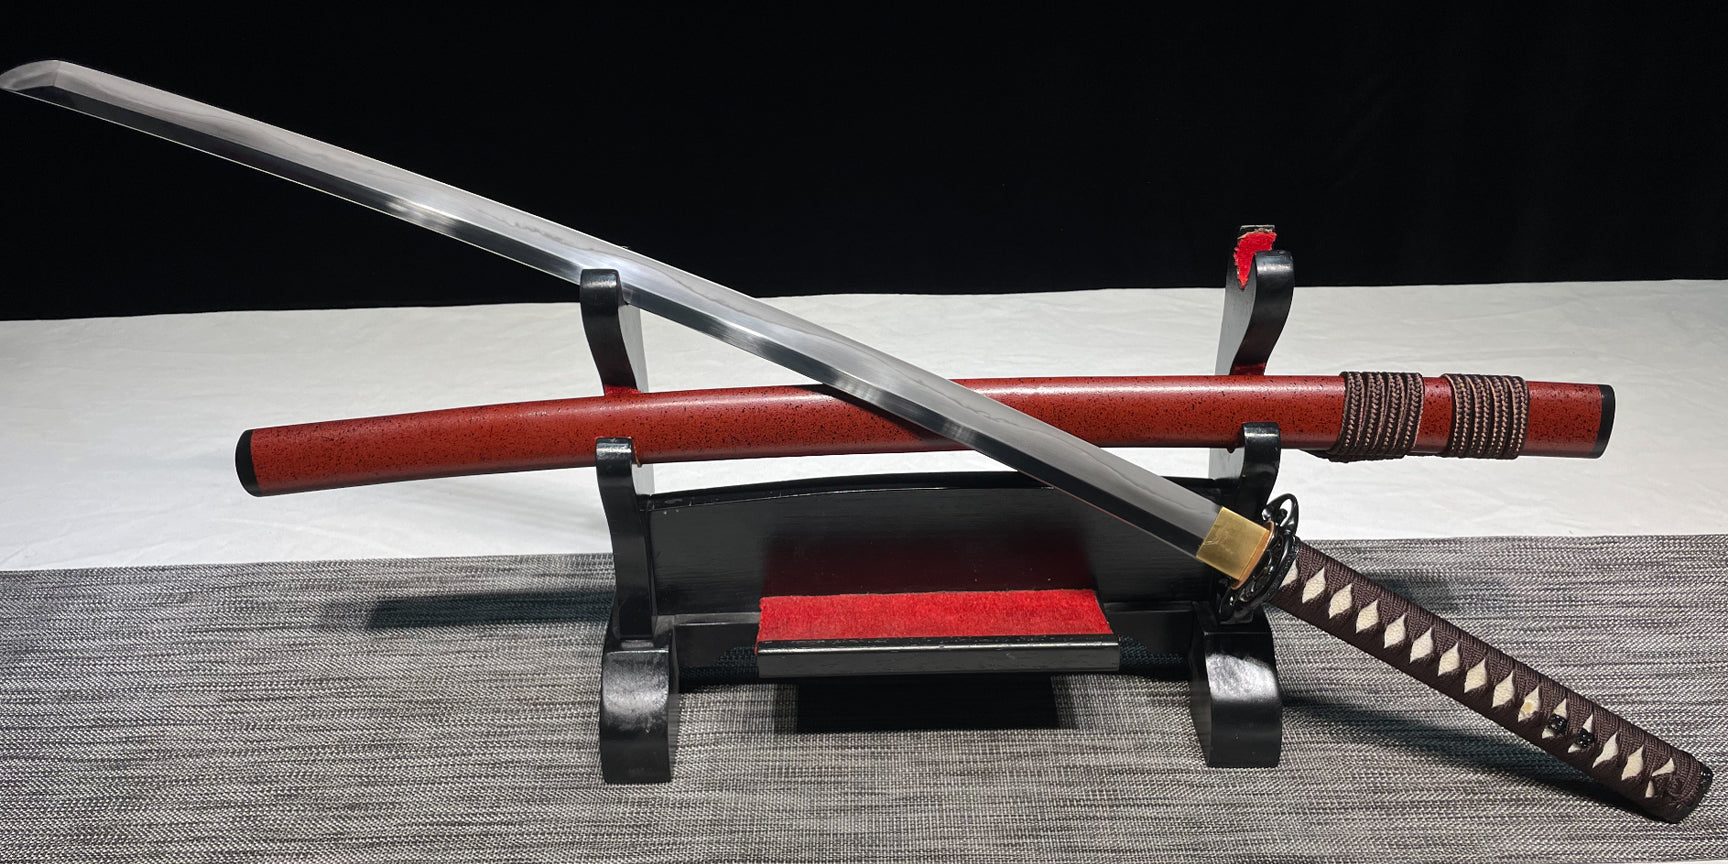 Forged in the Crucible: The Craftsmanship behind Battle Ready Samurai Swords in the Anime World